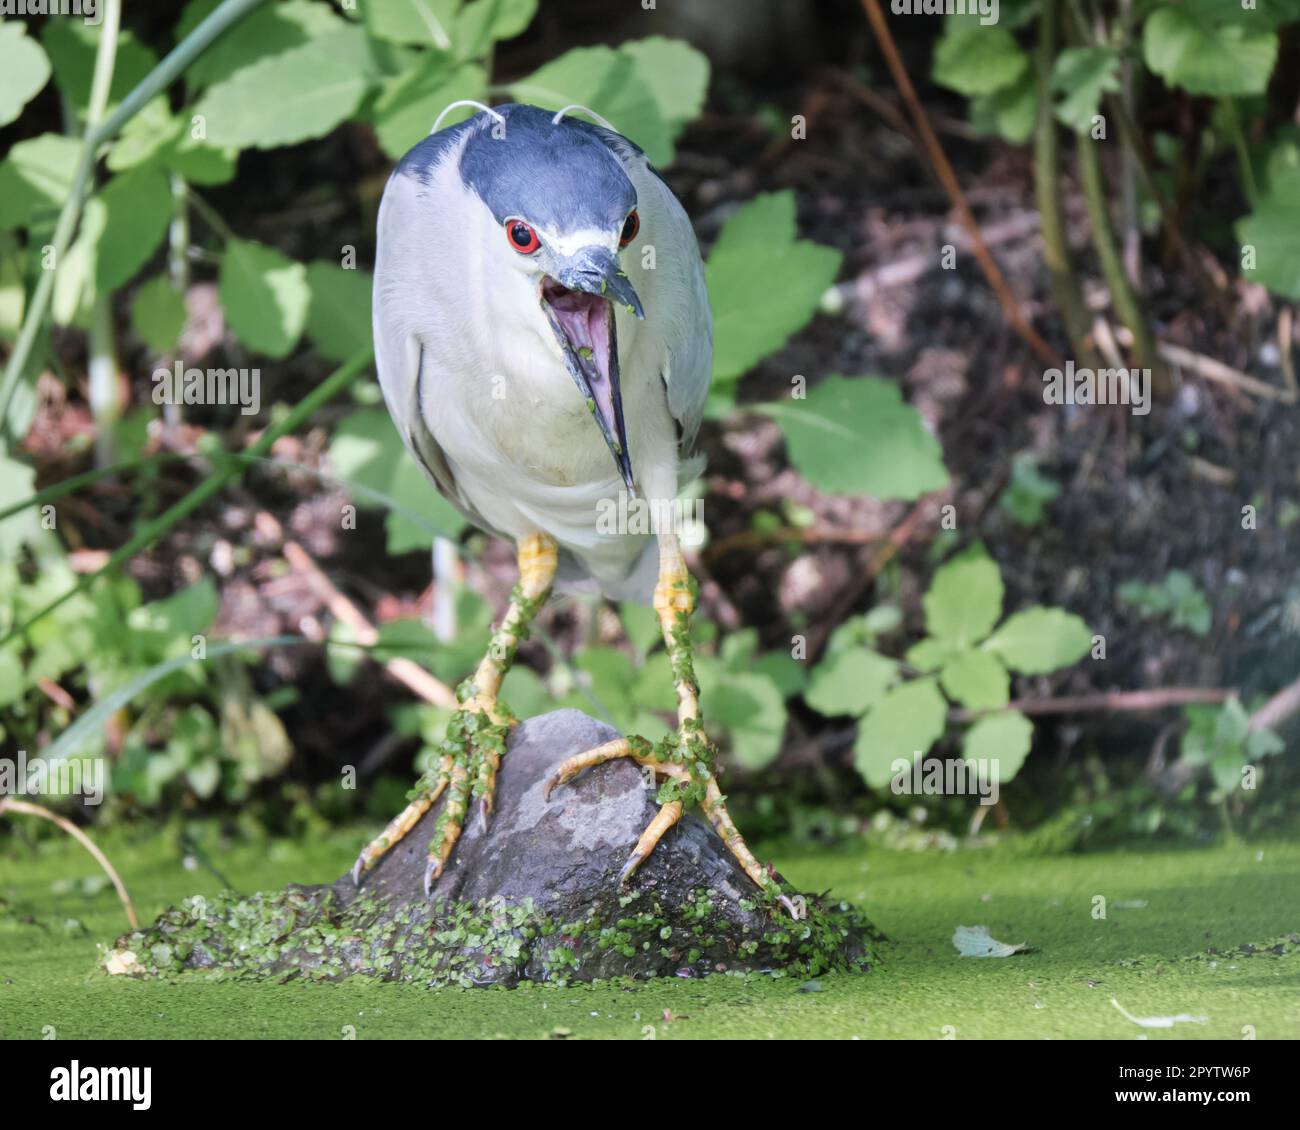 a black crownded night heron, nycticorax nycticorax,  with beak open standing on rocks while feeding from algeas Stock Photo